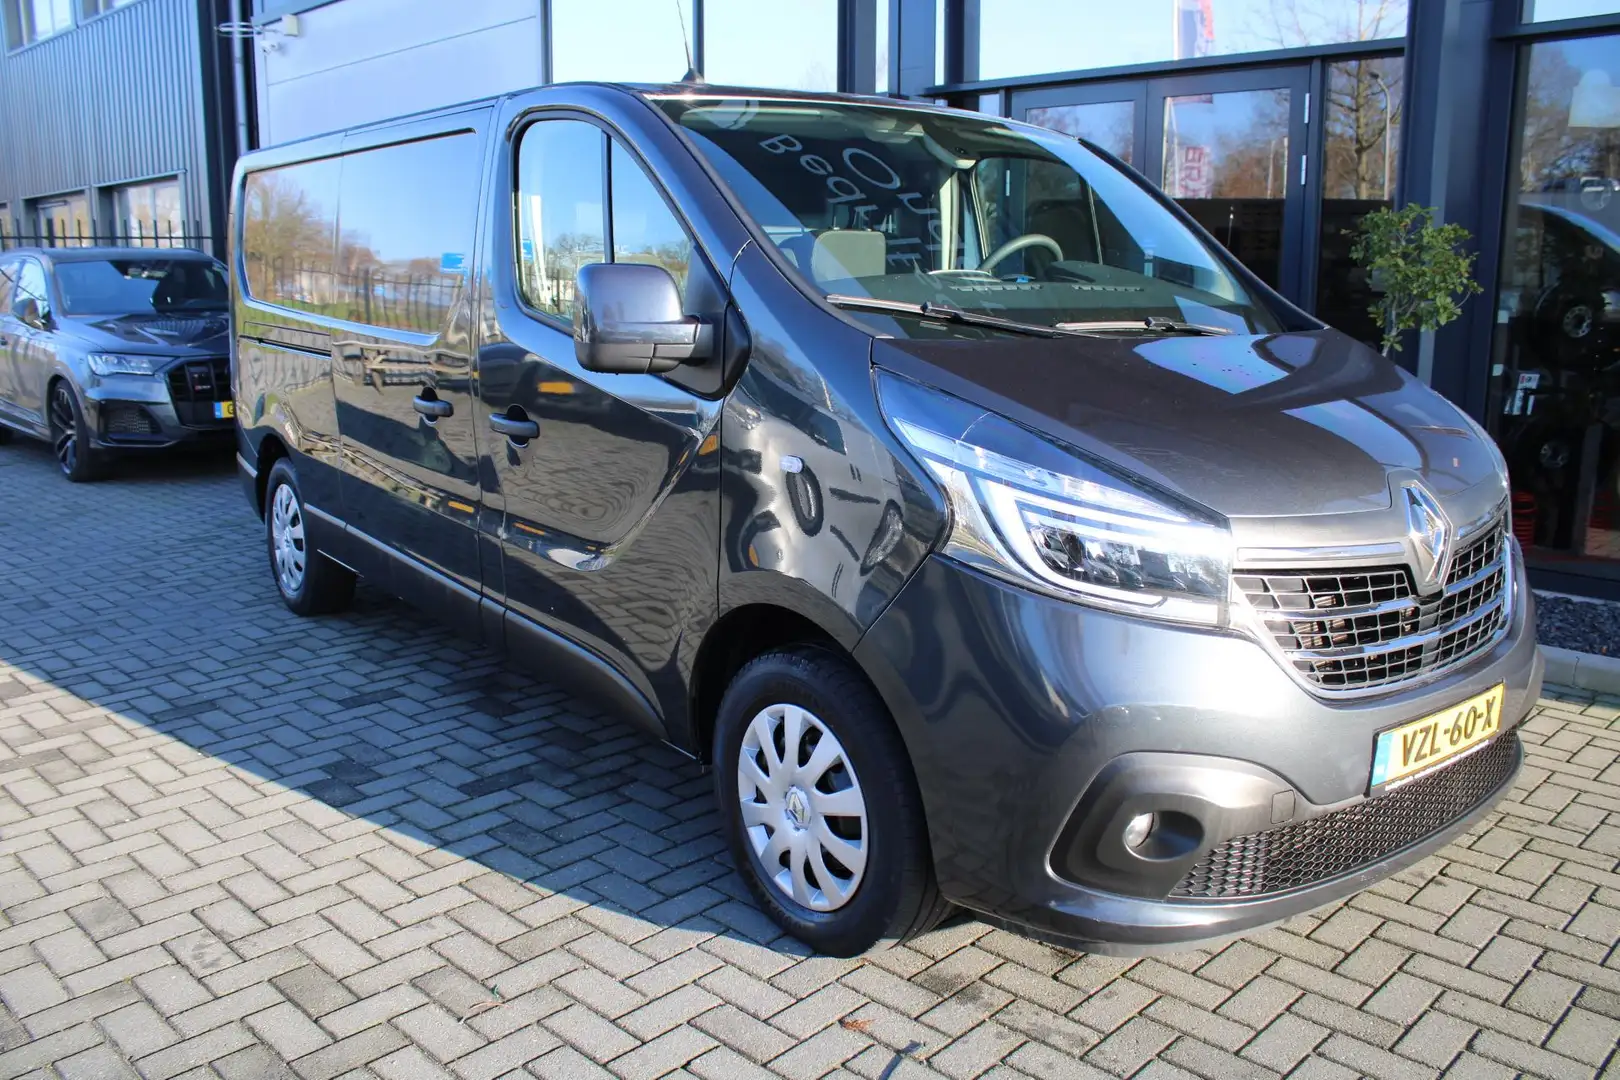 Renault Trafic 2.0 dCi 145 L2H1 automaat navi luxe lease 517,- p/ Nero - 2